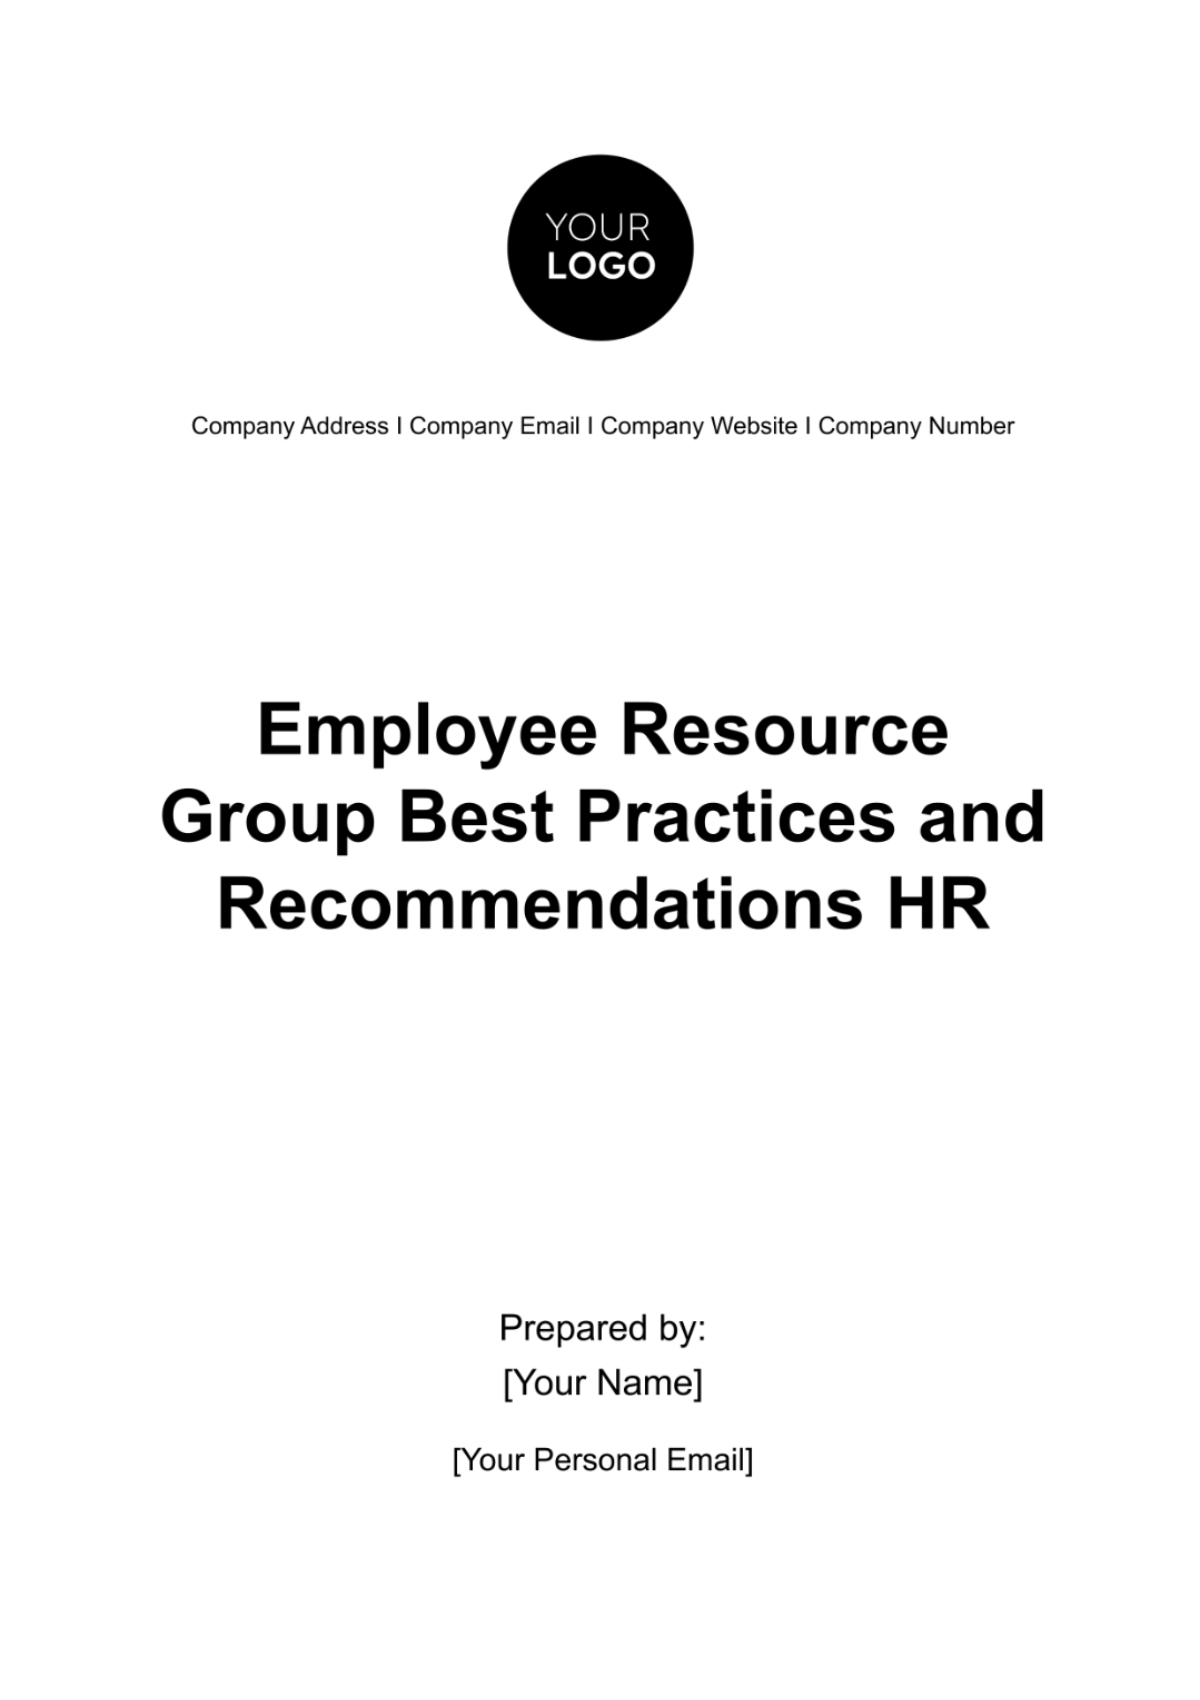 Free Employee Resource Group Best Practices and Recommendations HR Template